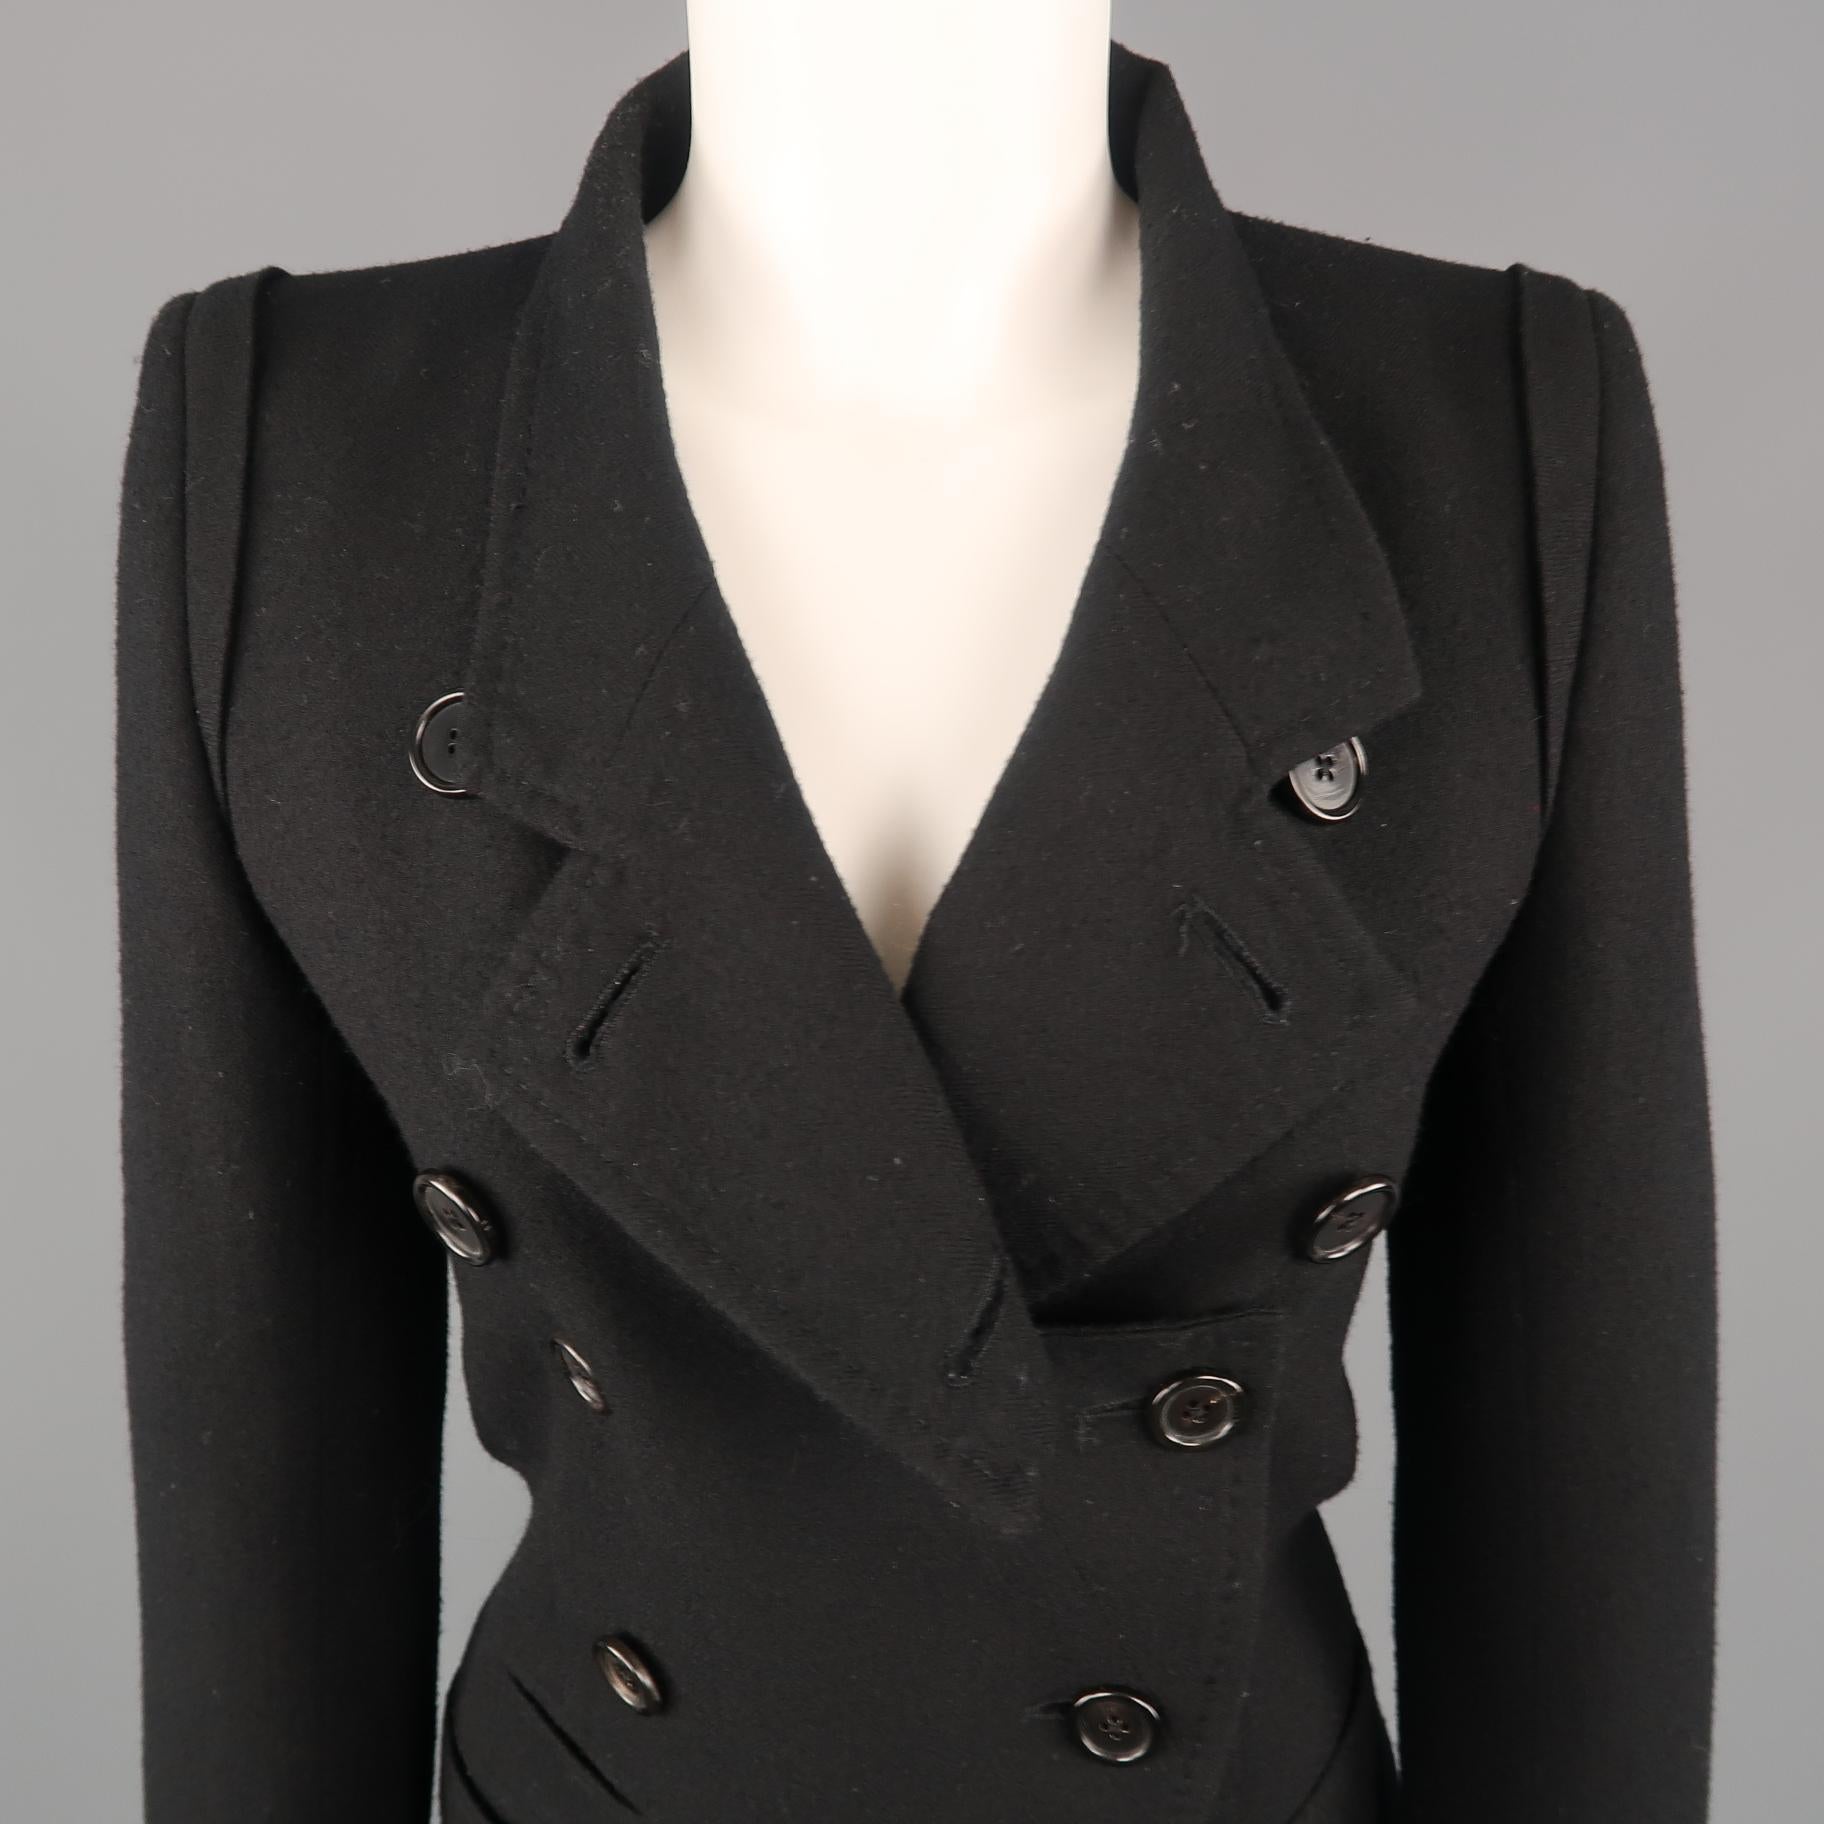 ANN DEMEULEMEESTER jacket comes in black wool with a double breasted slit lapel button closure front, slit pockets, and shoulder details. Made in Portugal.
 
Very Good Pre-Owned Condition.
Marked: EU 36
 
Measurements:
 
Shoulder: 15 in.
Bust: 34